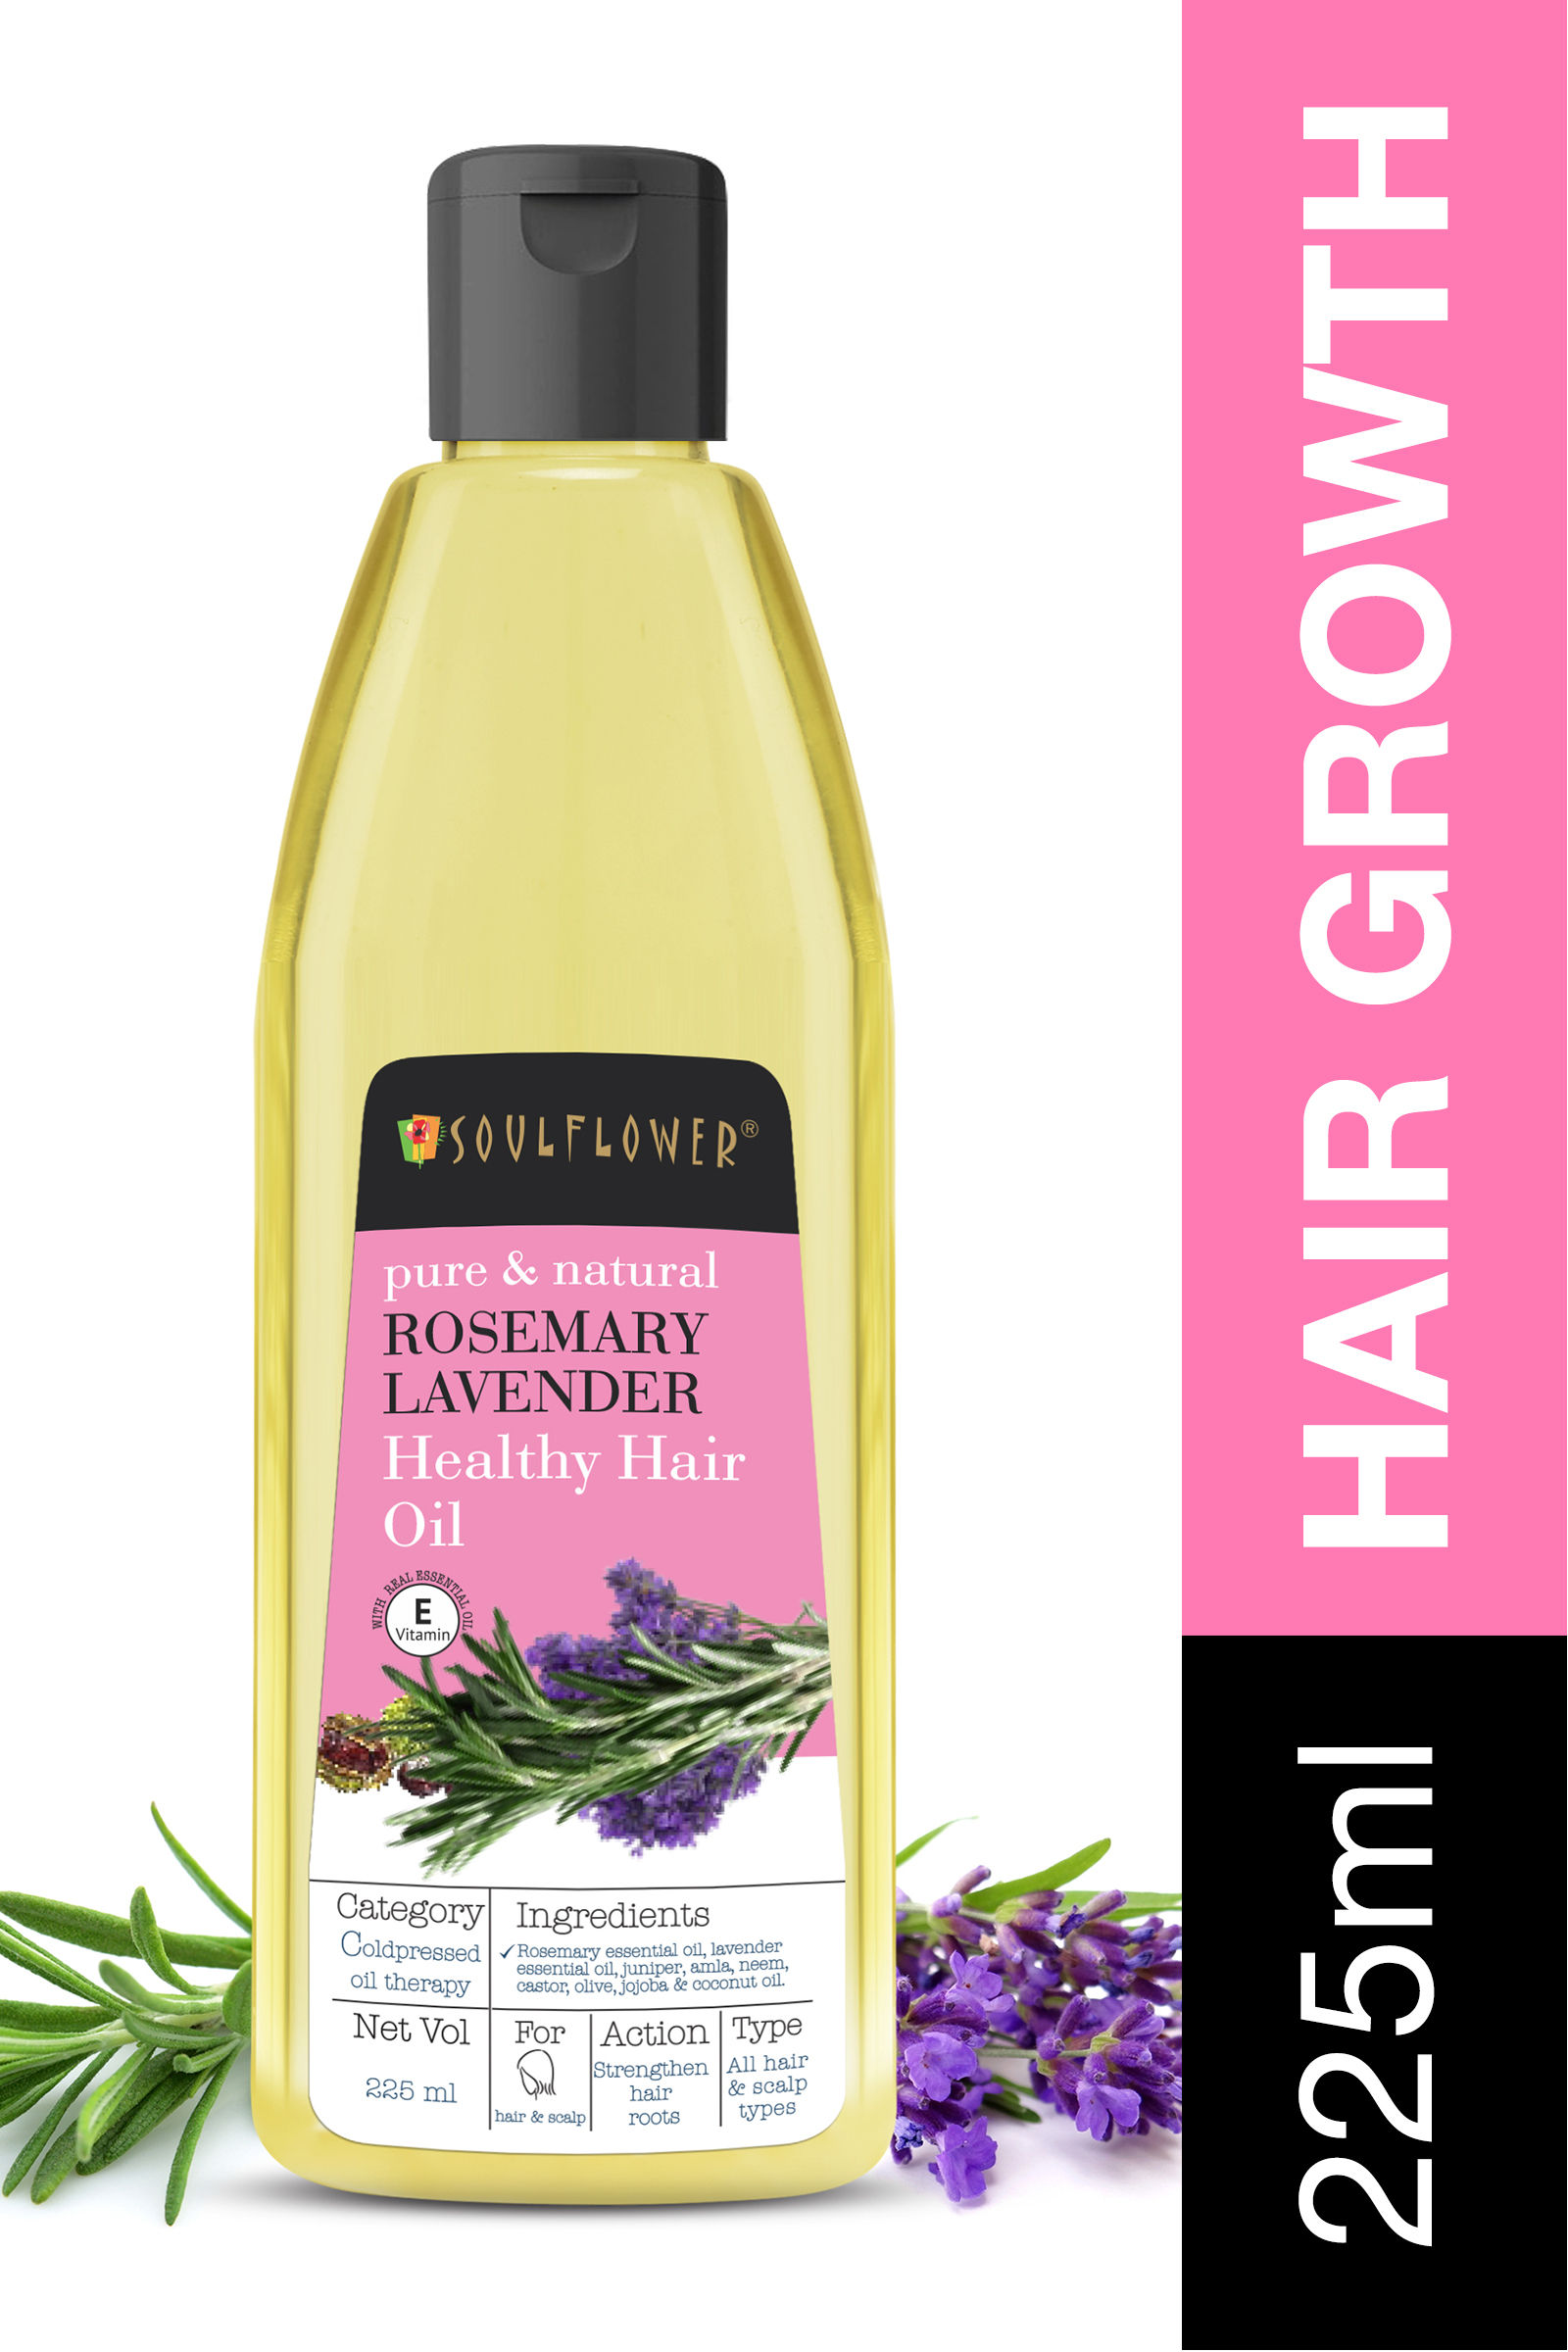 Soulflower Rosemary Lavender Healthy Hair Oil Buy Soulflower Rosemary  Lavender Healthy Hair Oil Online at Best Price in India  Nykaa